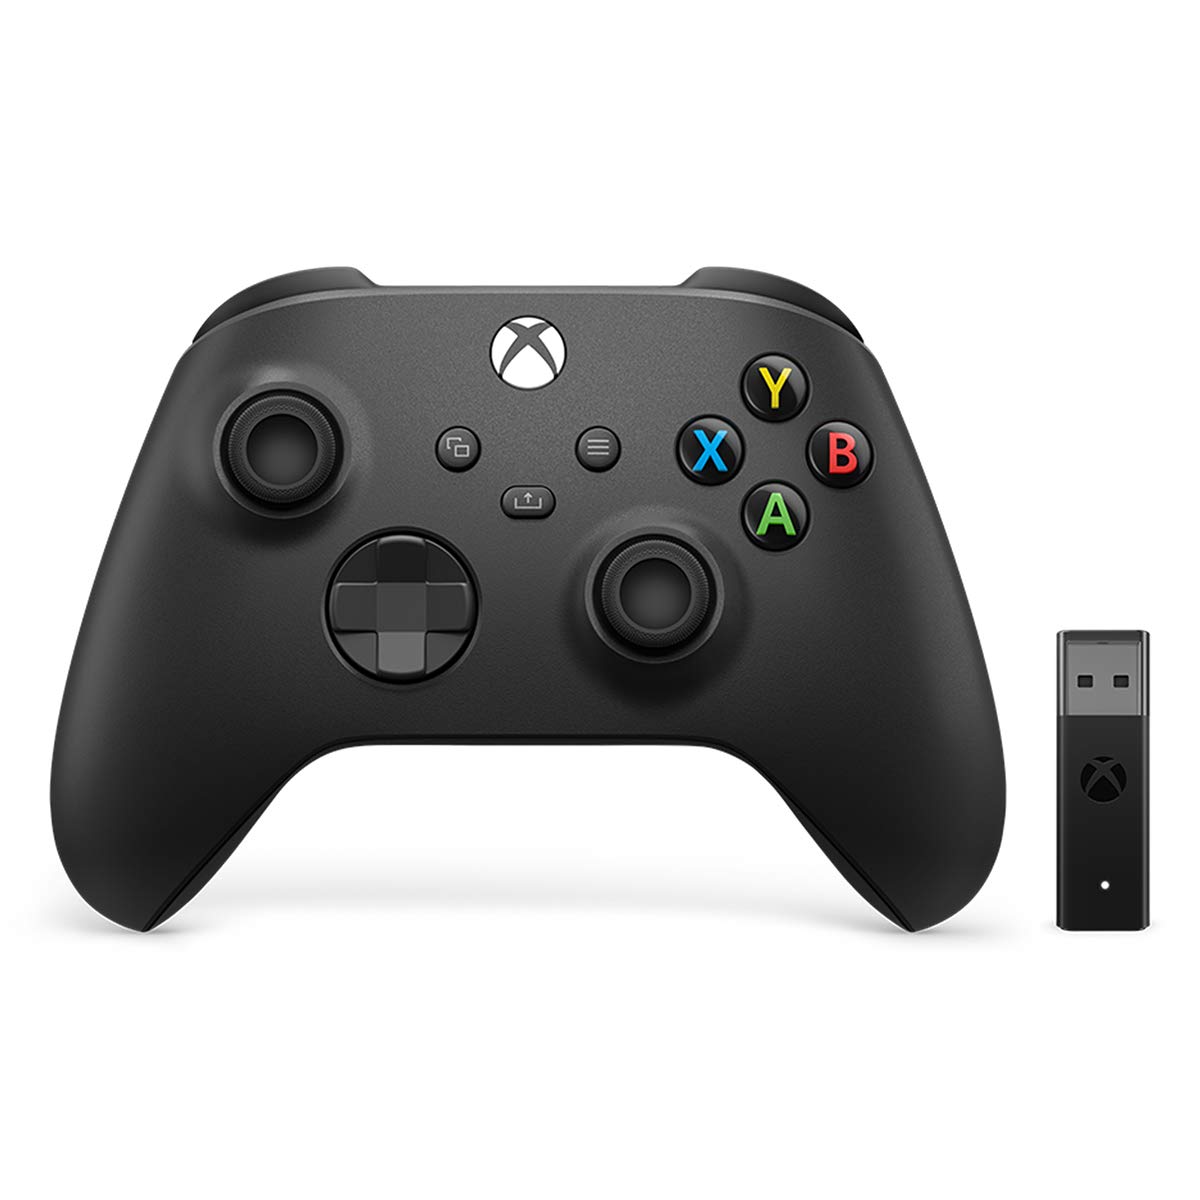 Connect the controller to the Xbox One and update the firmware
Check for firmware updates on the PC by connecting the controller and using the Xbox Accessories app